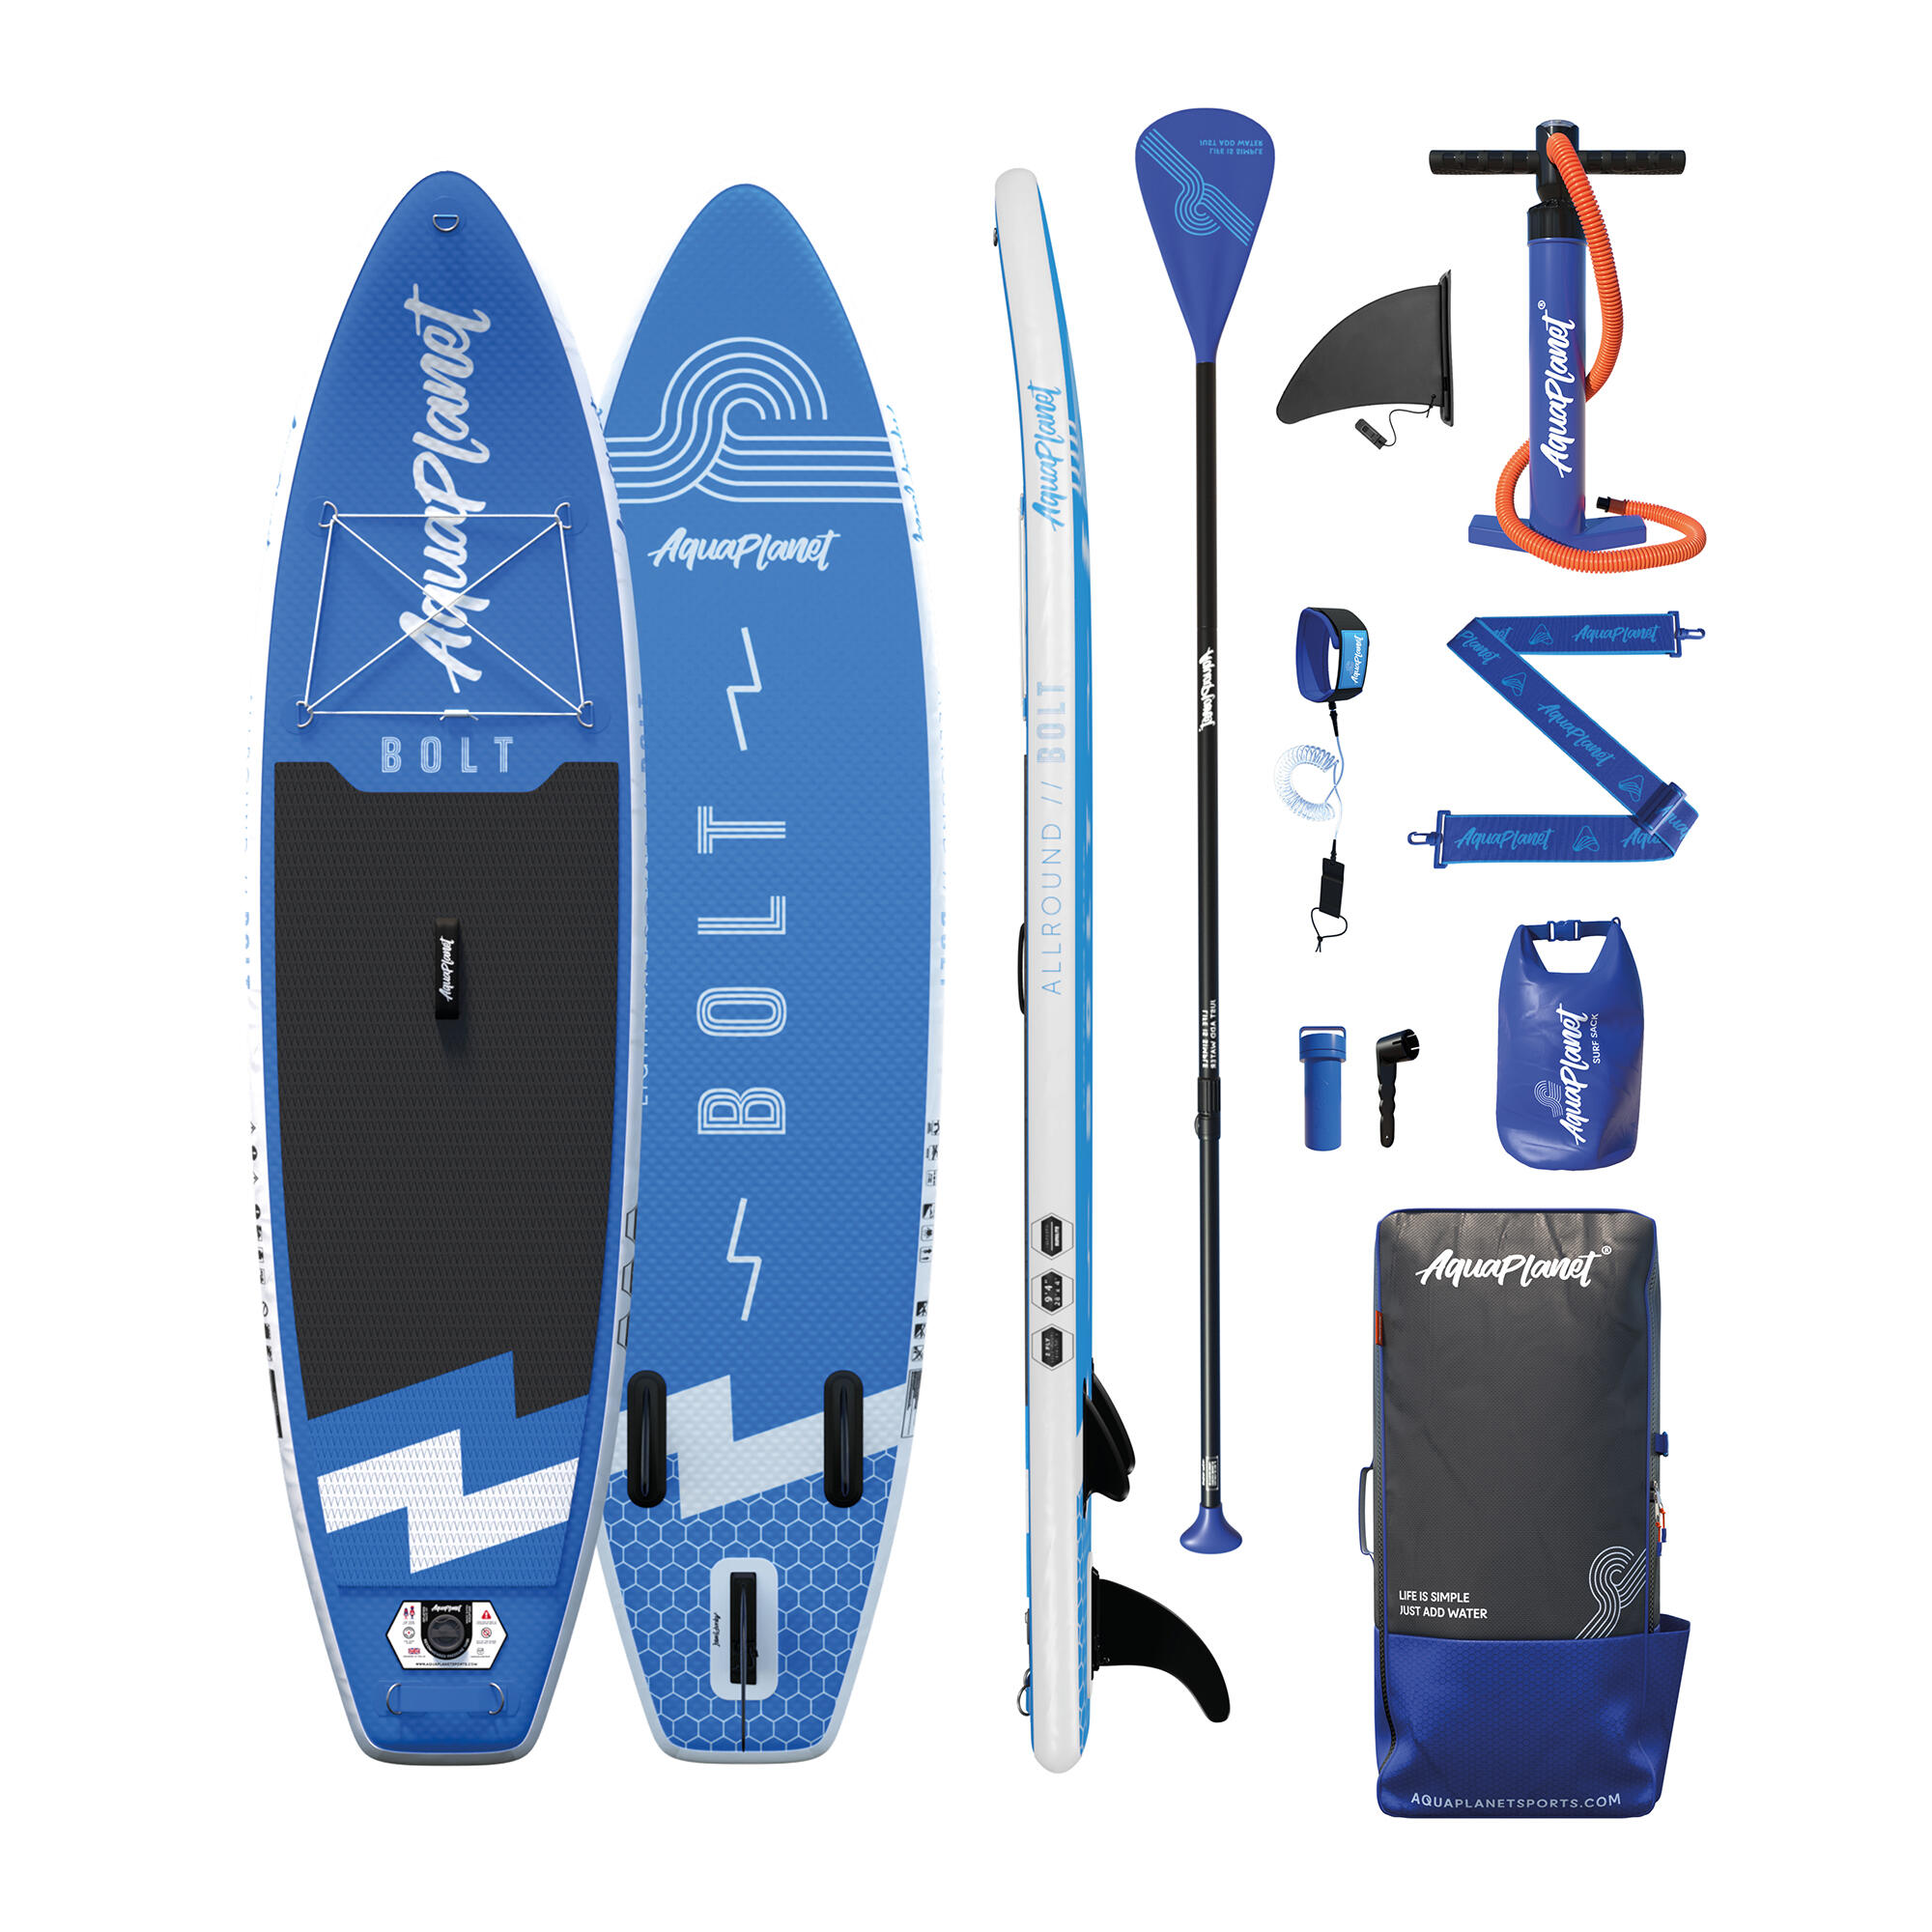 Aquaplanet BOLT 9'4 Junior Inflatable Paddle Board Package - Blue 1/6